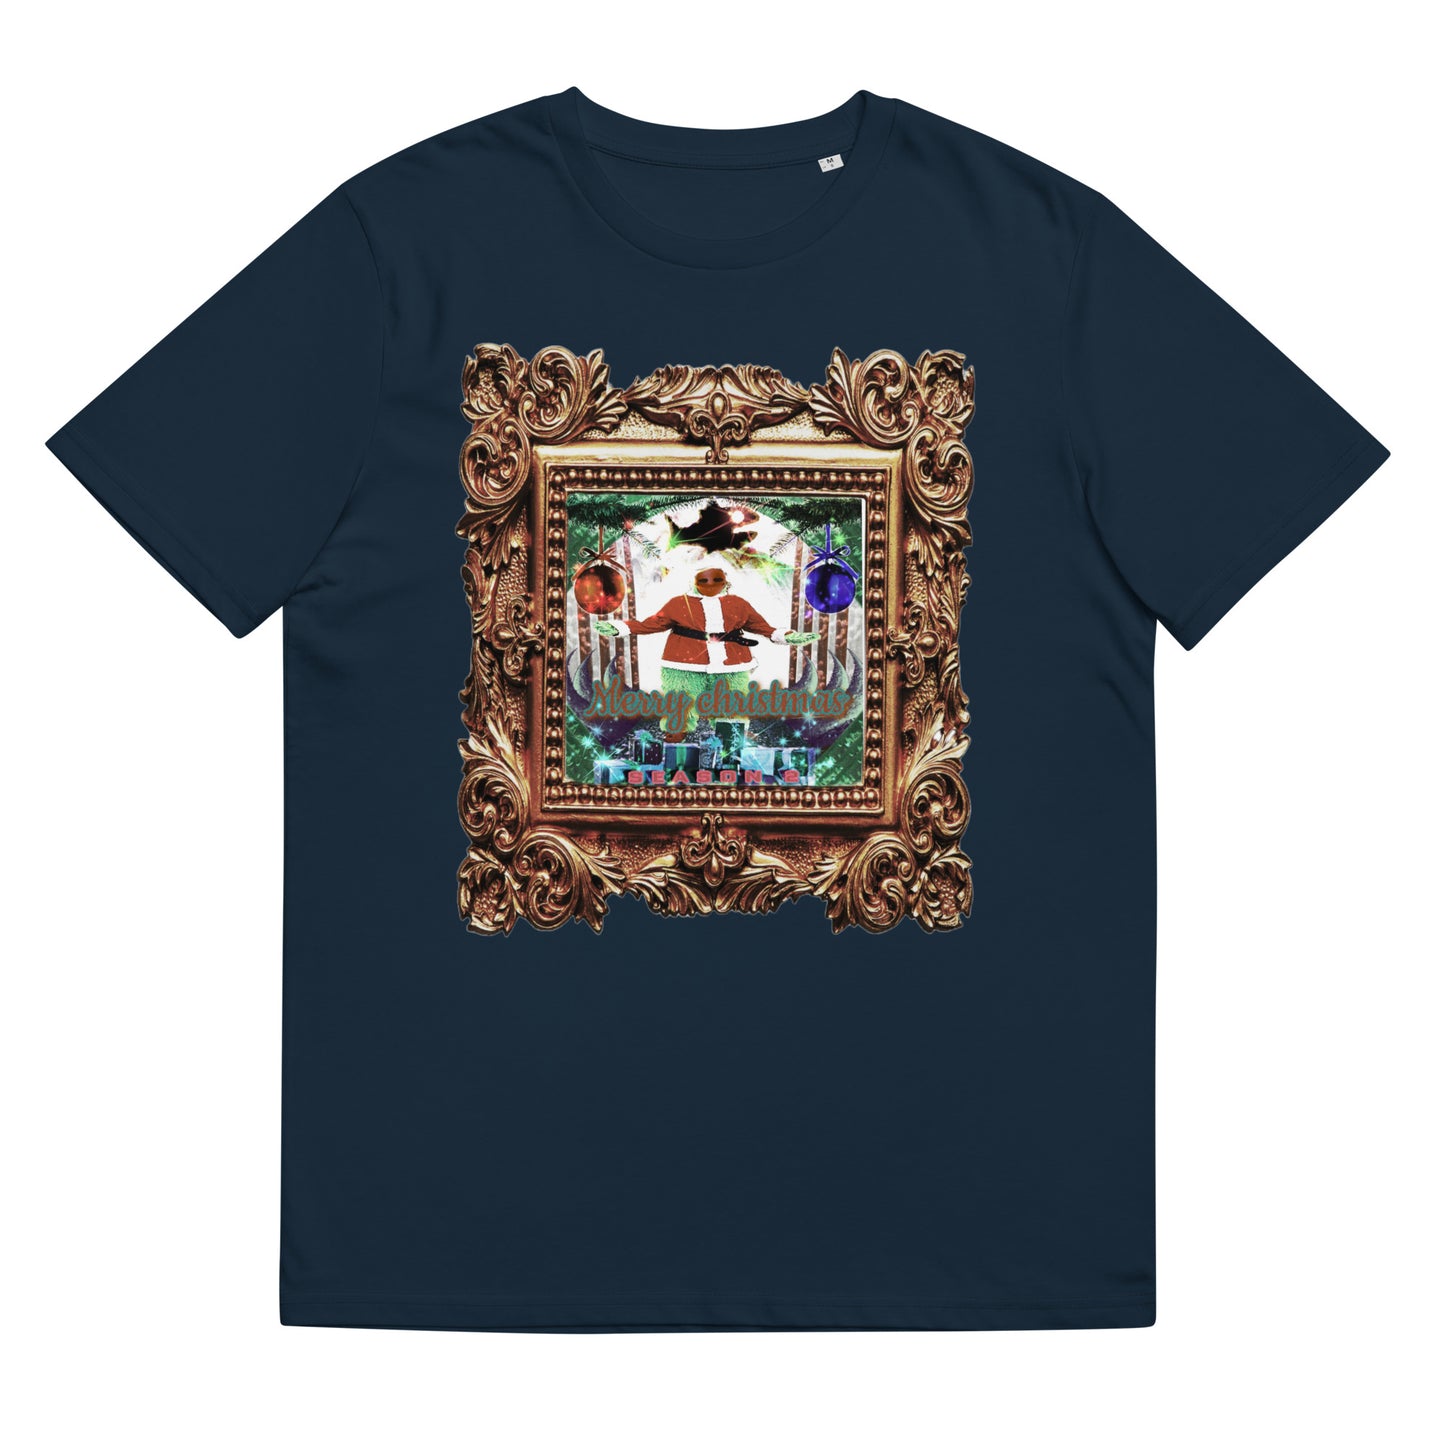 THE FISH STOLE CHRISTMAS T-SHIRT